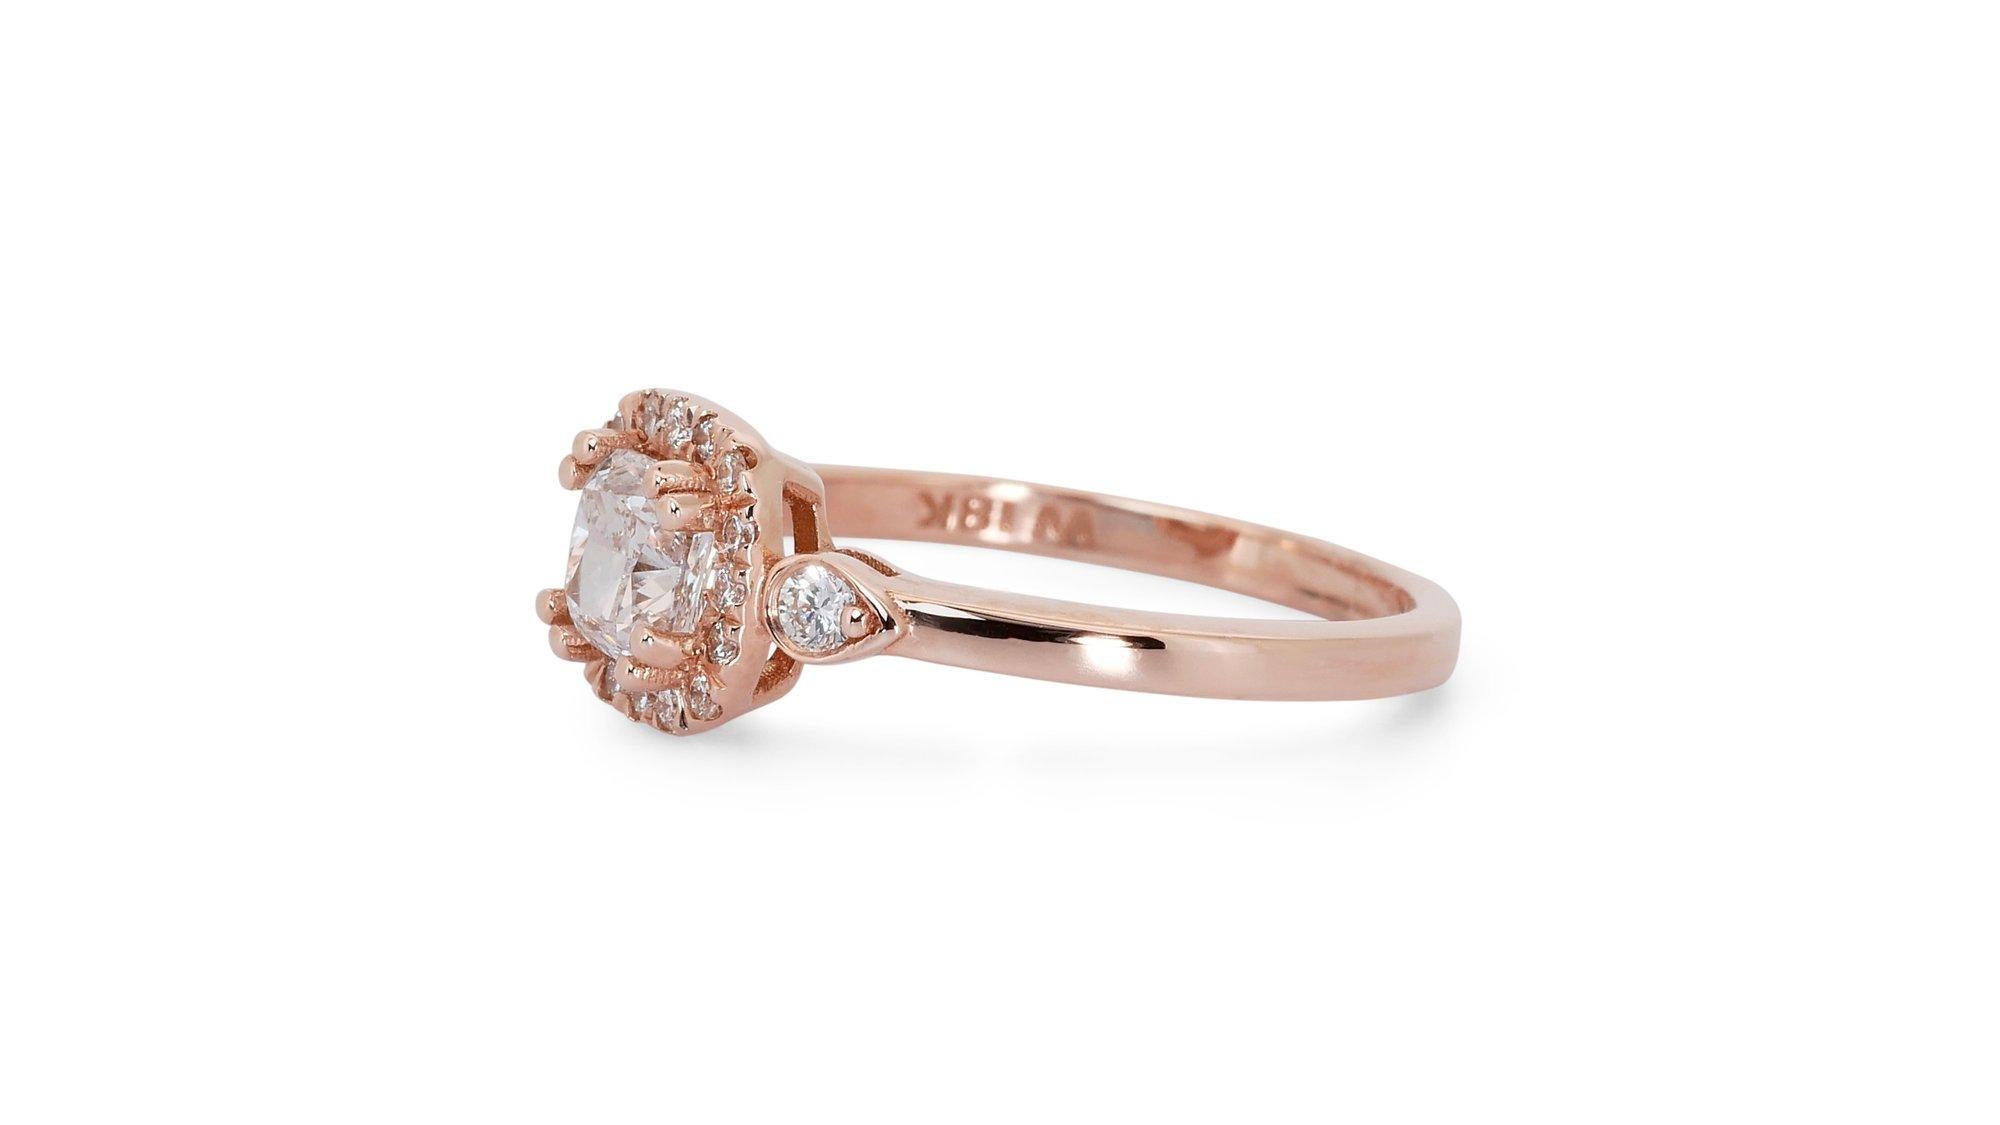 Dazzling 1.10ct Diamonds Halo Ring in 18k Rose Gold - GIA Certified For Sale 2